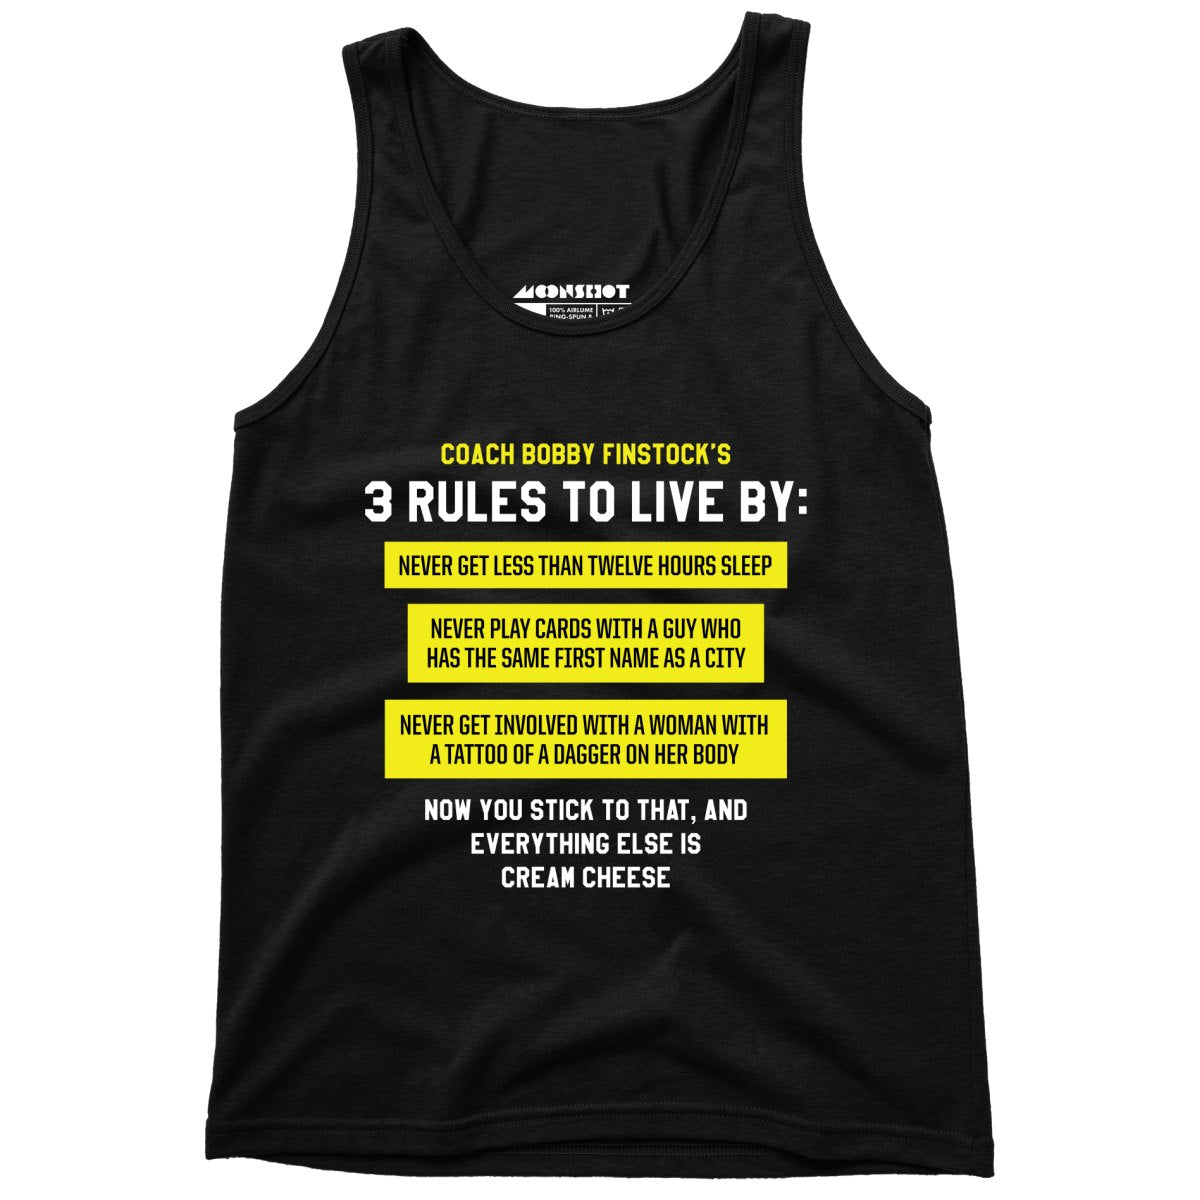 Coach Bobby Finstock's 3 Rules to Live By - Unisex Tank Top